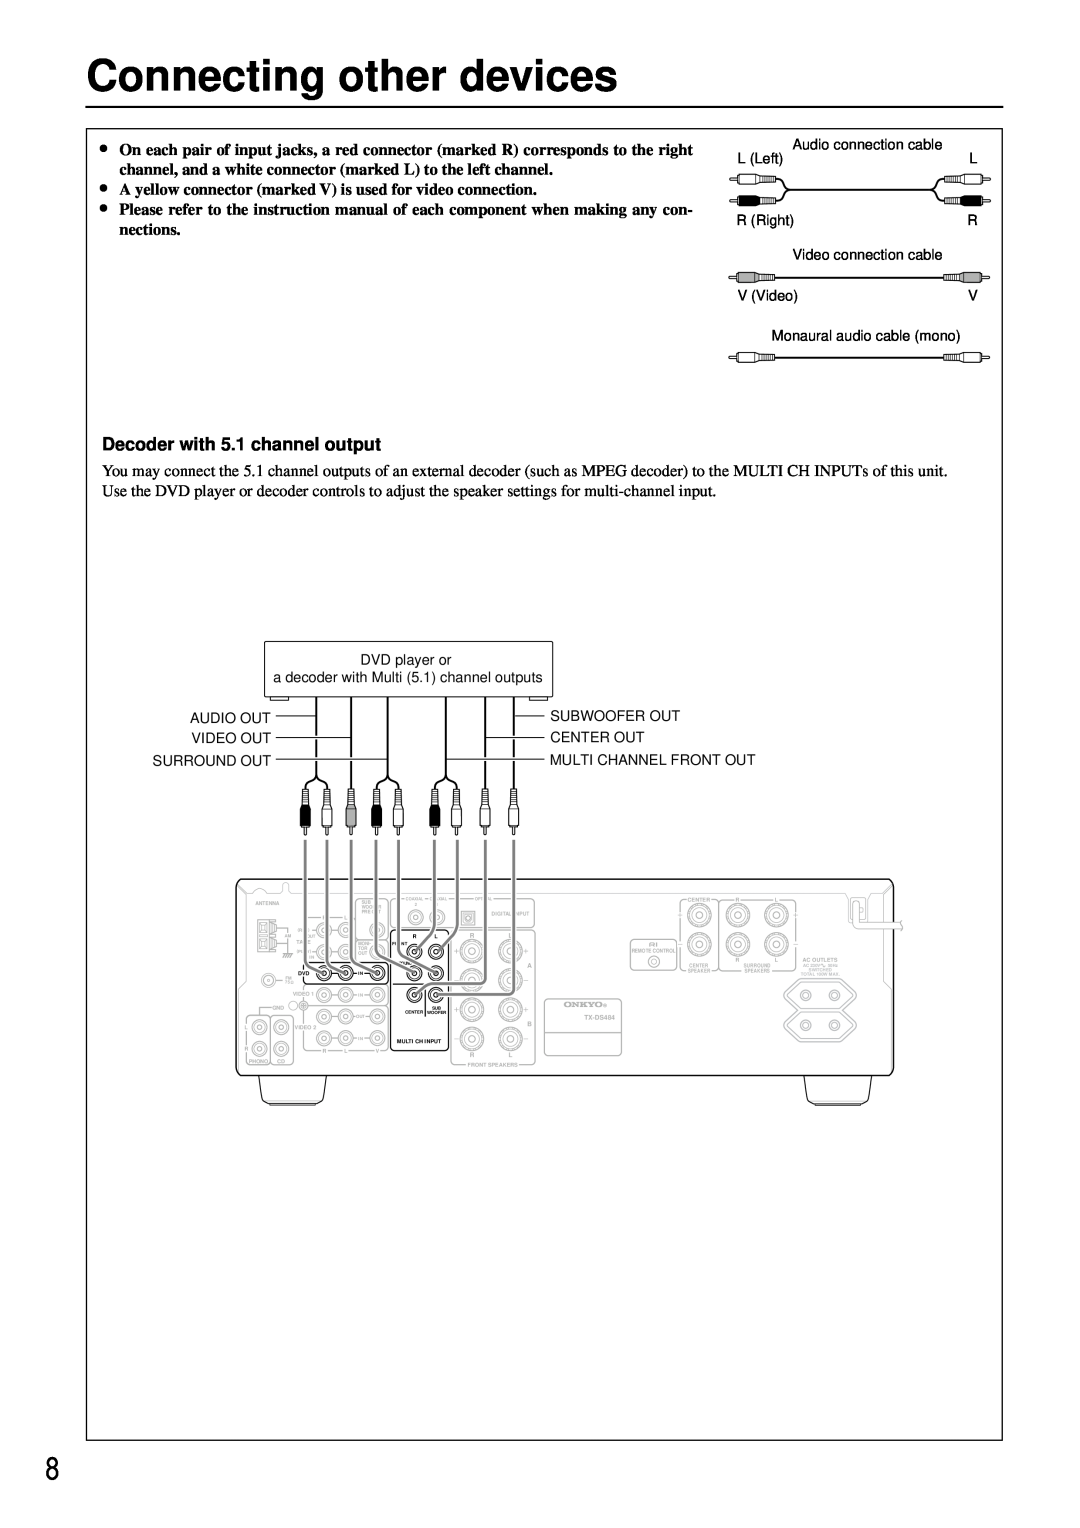 Onkyo TX-DS484 instruction manual Connecting other devices, Decoder with 5.1 channel output 